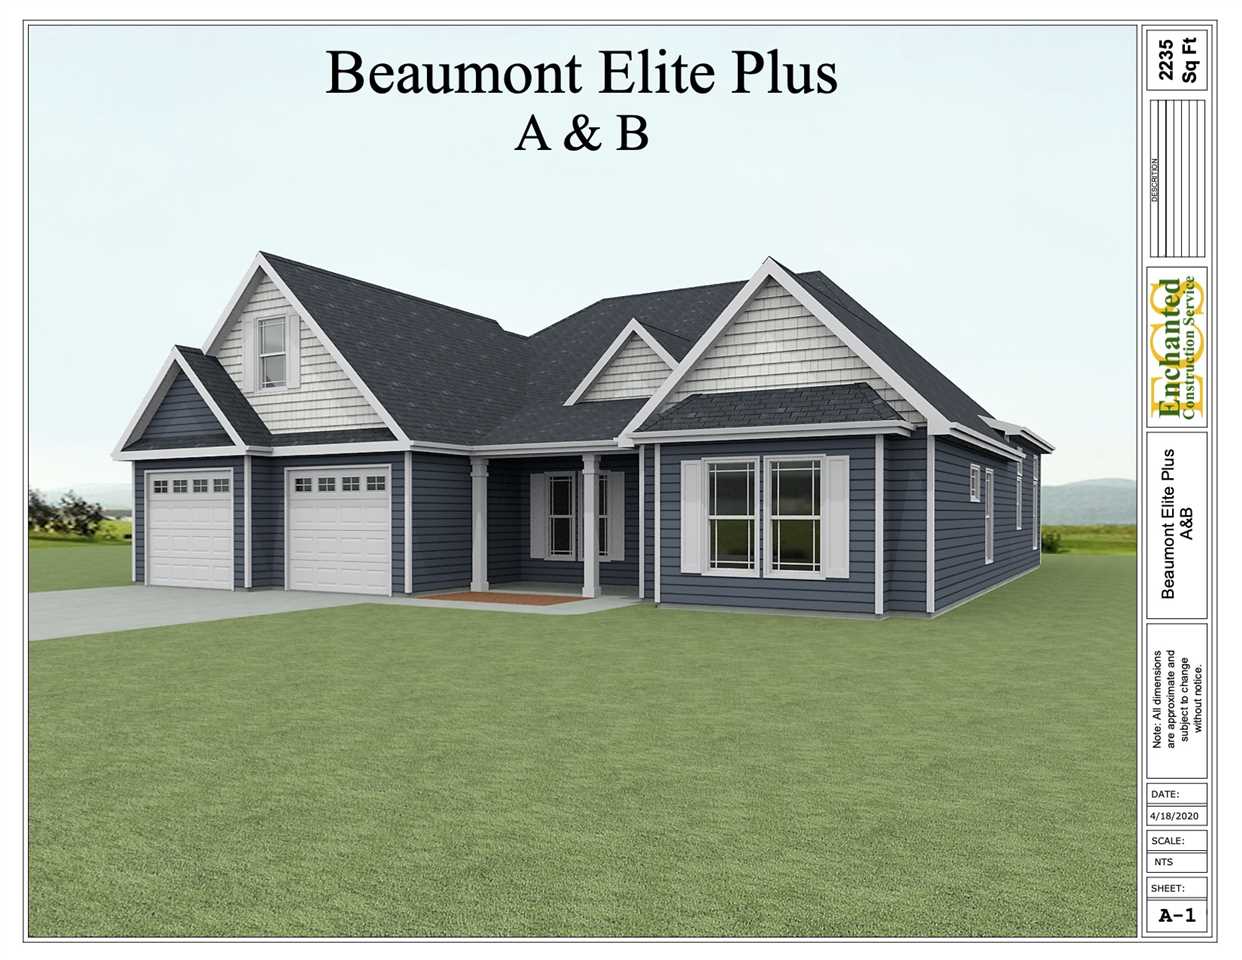 The Beaumont Elite plus has 3/4 bedroom 2.5 bath with 2235 square feet built in beautiful Bruce Harbor on Lake Lyman. The home features an oversized 2 car garage plenty of room for your boat and toys. This home will feature granite counter tops, 5 inch engineered hardwood floors, crown molding, and a covered patio off the Breakfast Nook.